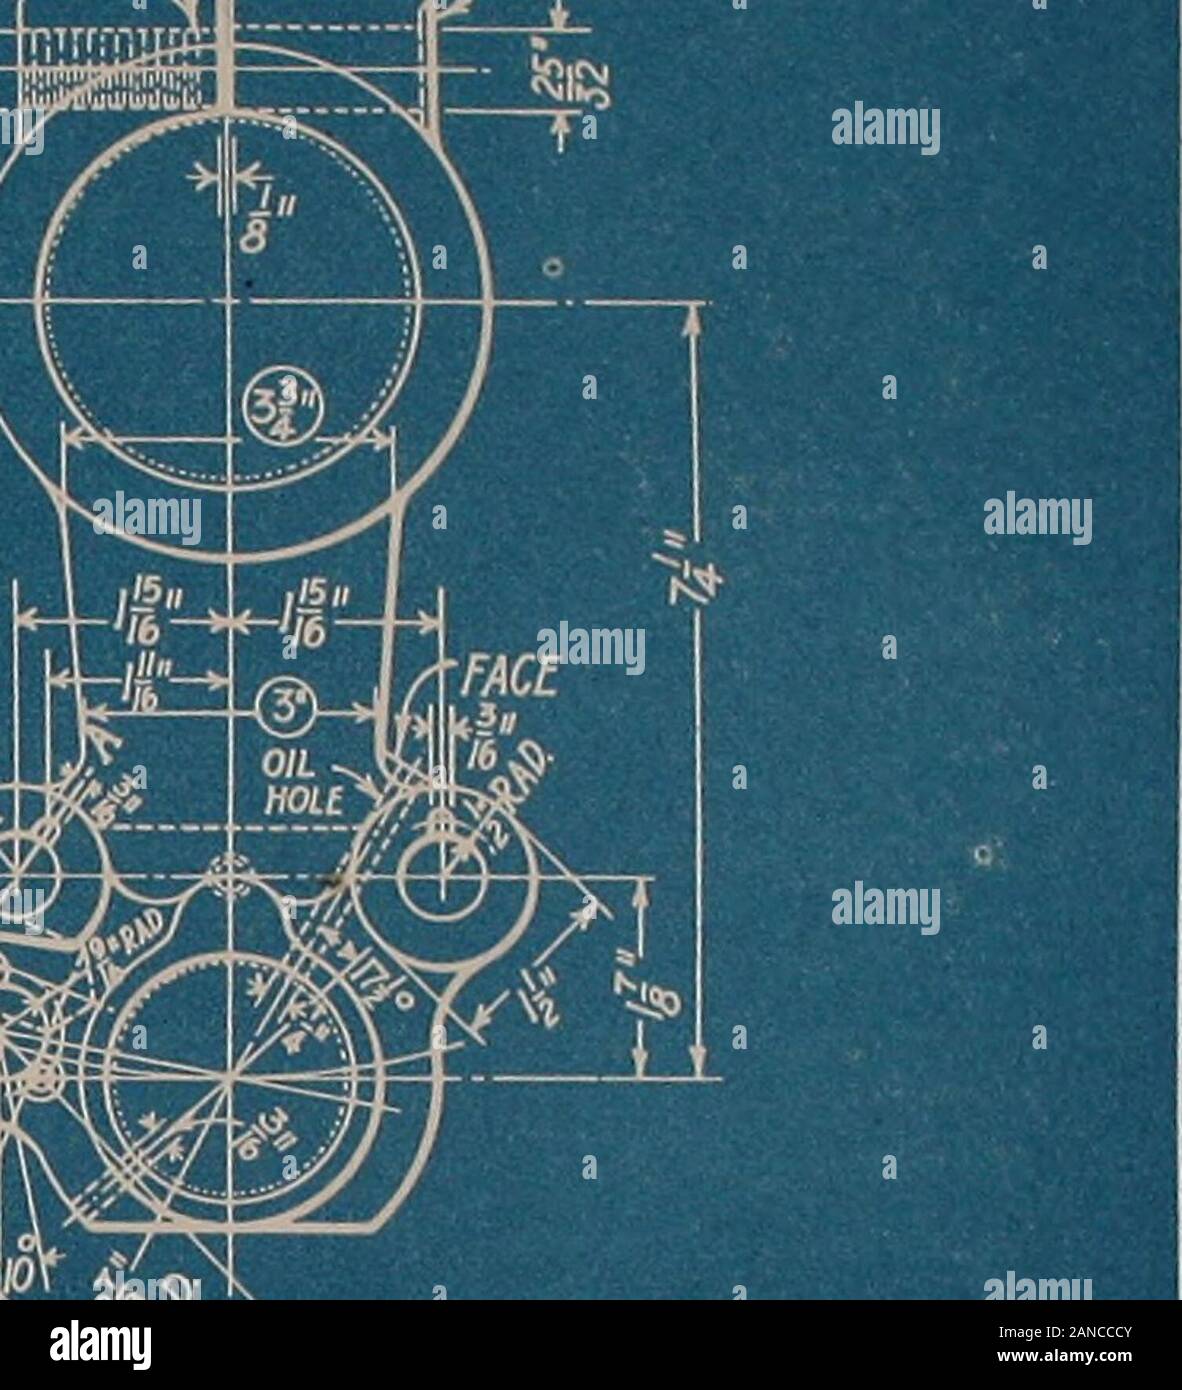 Blueprint reading; a practical manual of instruction in blueprint reading through the analysis of typical plates with reference to mechanical drawing conventions and methods, the laws of projection, etc . 3 &gt;| 2- STY. 20 A--WB-1 CEN. A.BUSH. I-STY. 27 A--i B=l CL. PLATE M I- 5TY.56 A--k l-STYbbA-l I ? STY 89 B--1 #2- ADJ. WORM FIXTU, Z-STYWA-k B-l APM5.a.B0LT E/ATt/i I-STY. 90 A4 B4 CEM arm head J 16 El 2-5TYI0IA=l B-? ARM 5. CL BOLT TOOLS Z-STY20iAl B-l D-J^ARM CL.BOLT JIGFOk ]? 5TY.20iA--g Bs D-14 CLAMPBOLT I - CENTRE A52 ;? CENTRE ADJUSTING WORM A 53 I ? CENTRE ADJUSTING WORM BUSHING AI9 Stock Photo